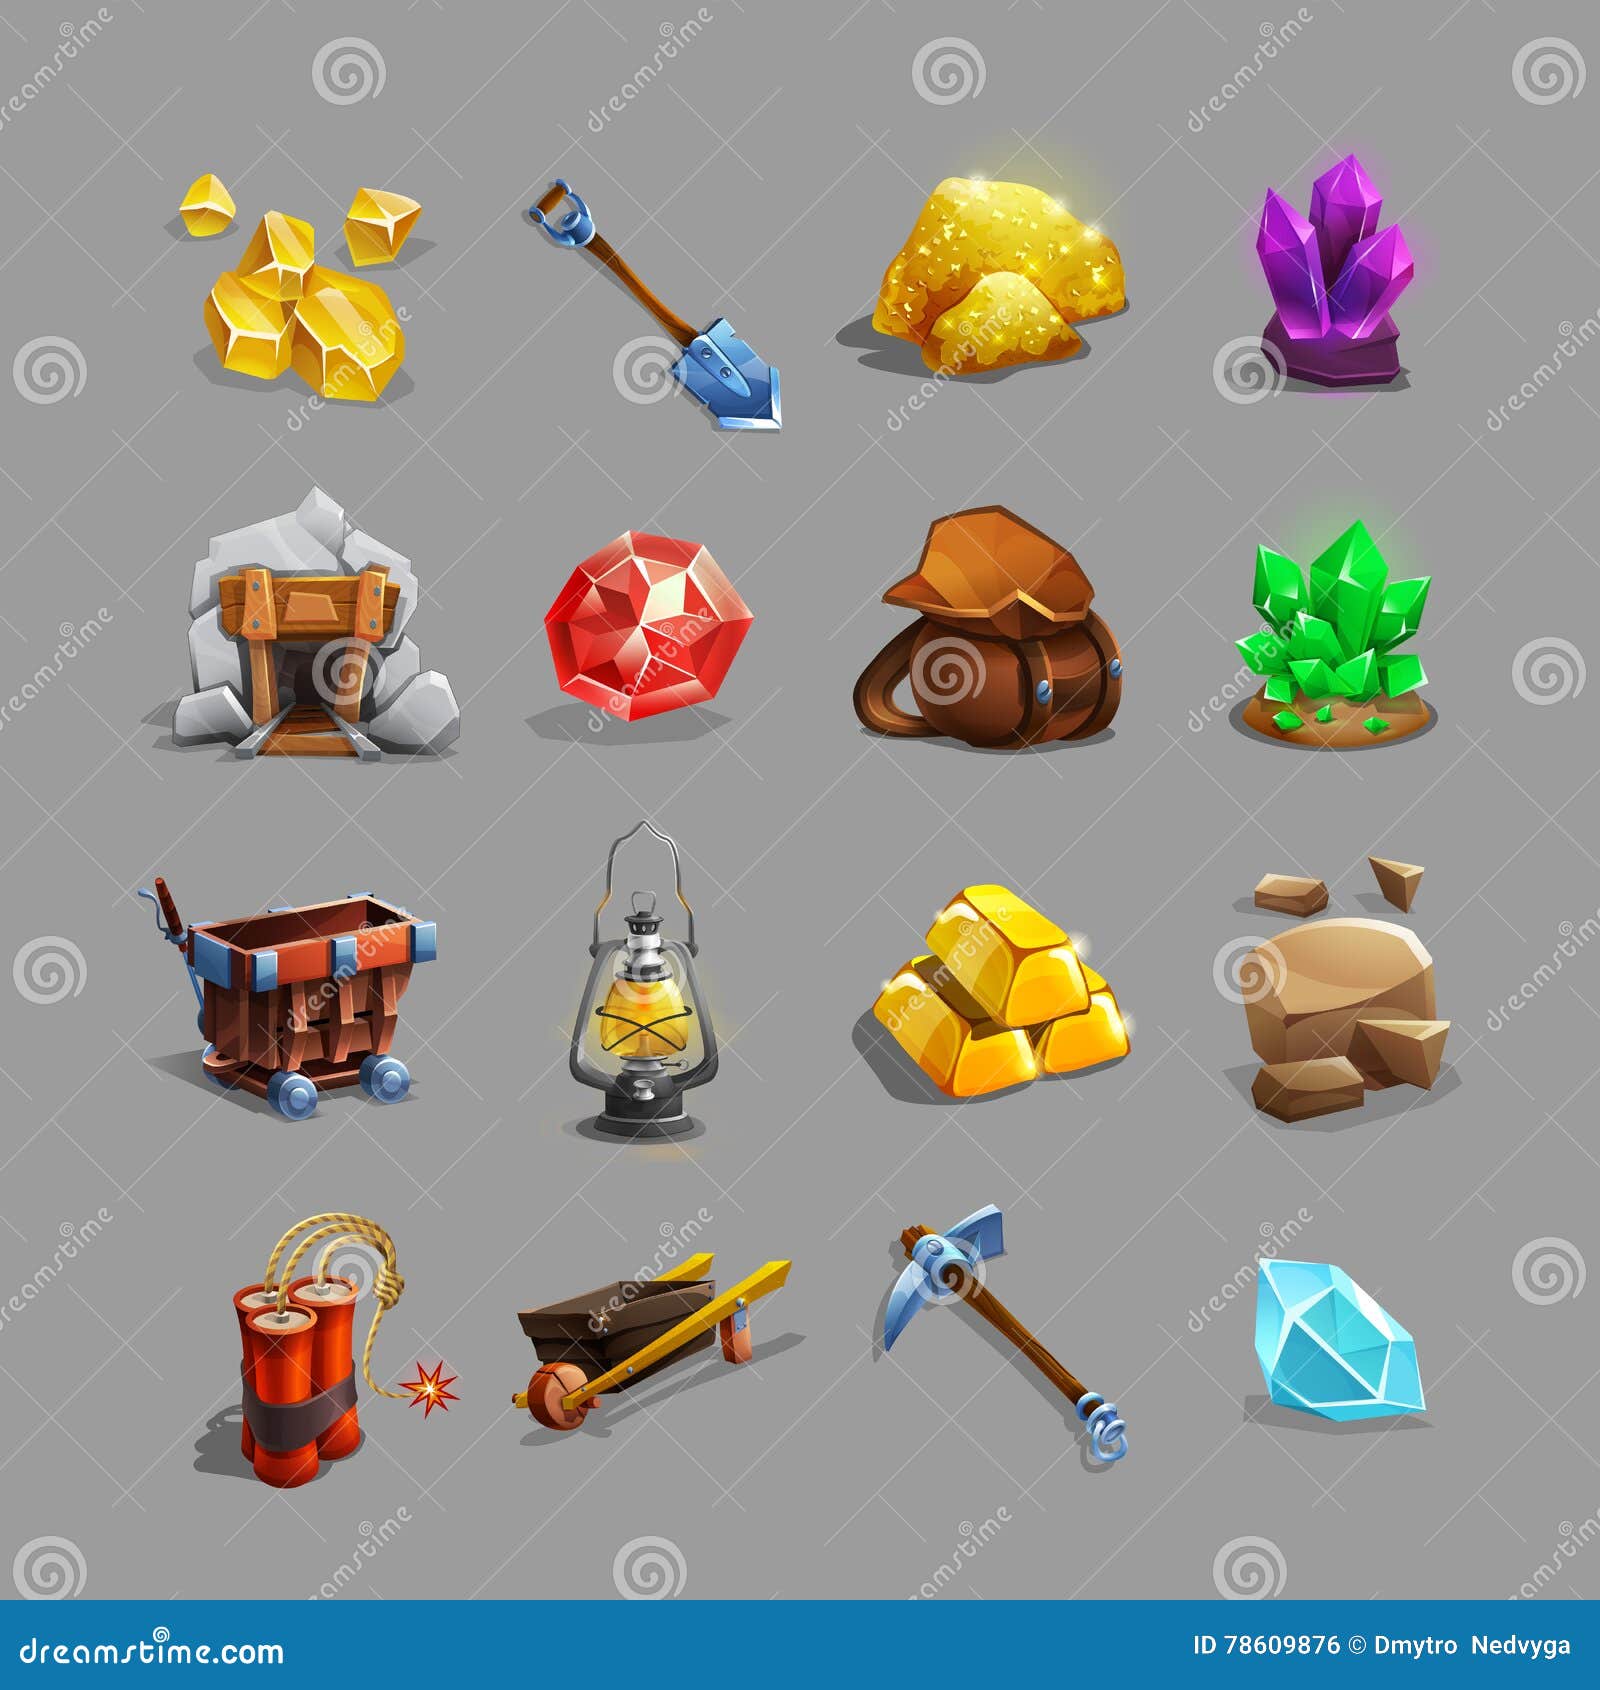 collection of decoration icons for mining strategy game. set of cartoon picking tools, stones, crystals, ores and gems.